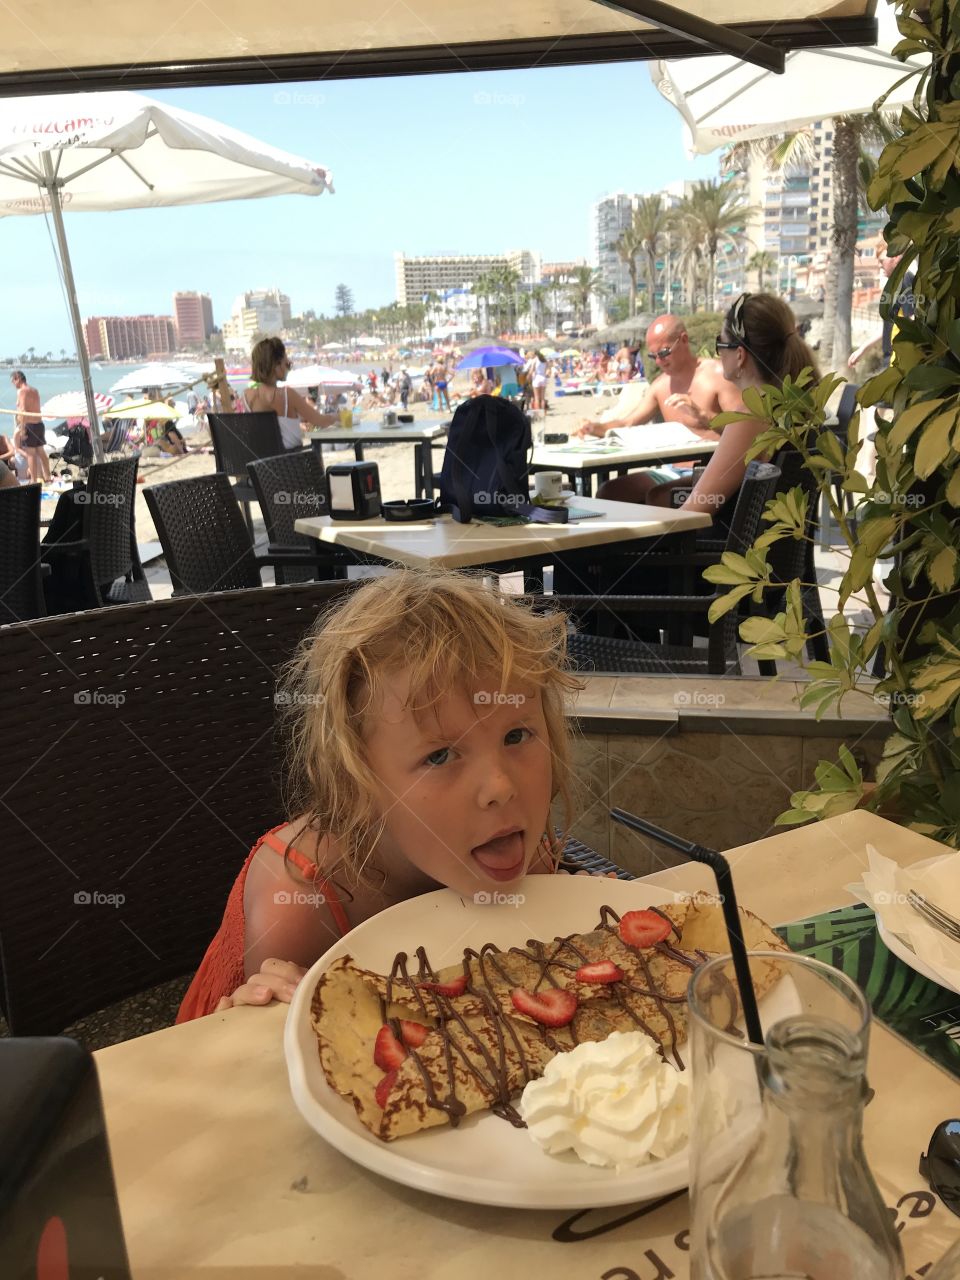 Pancakes (or crepes) were extra tasty after swimming in Benalmádena, Spain 